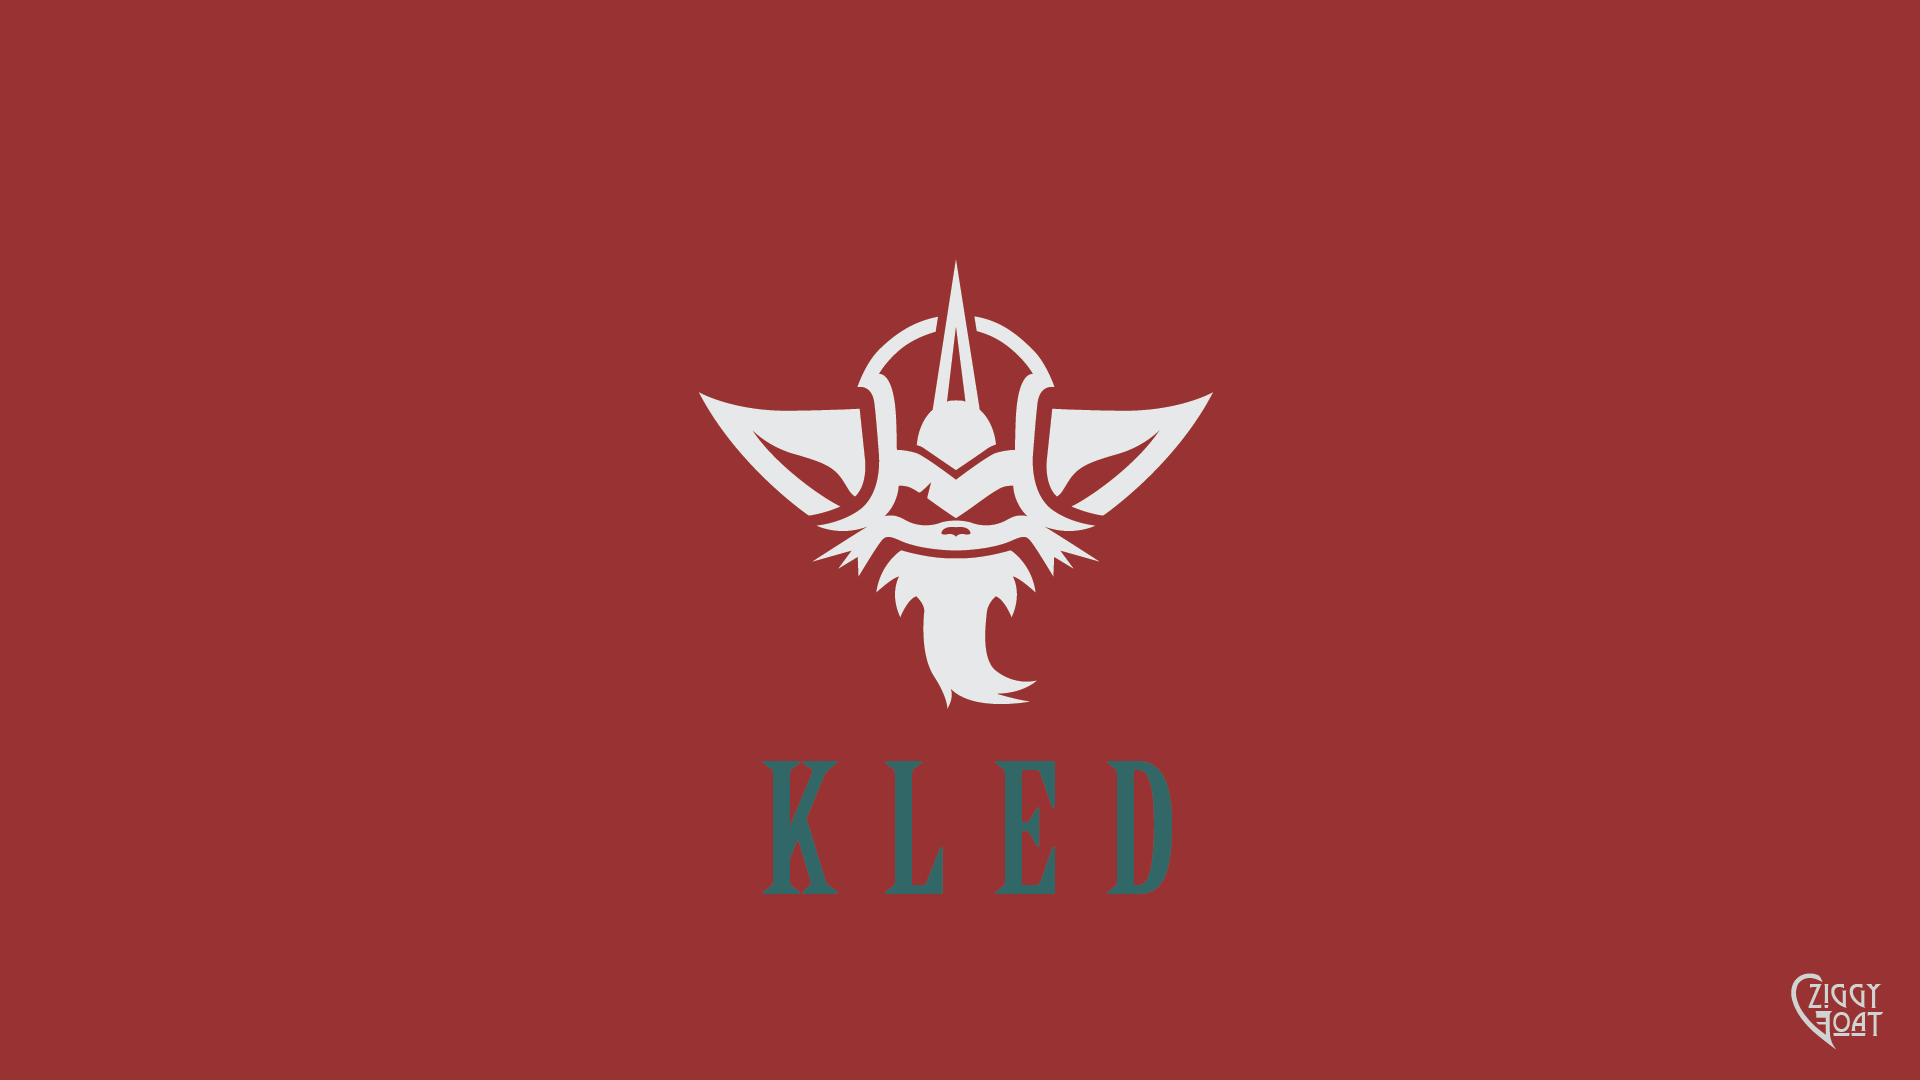 Todd Horwitch Kled Wallpaper